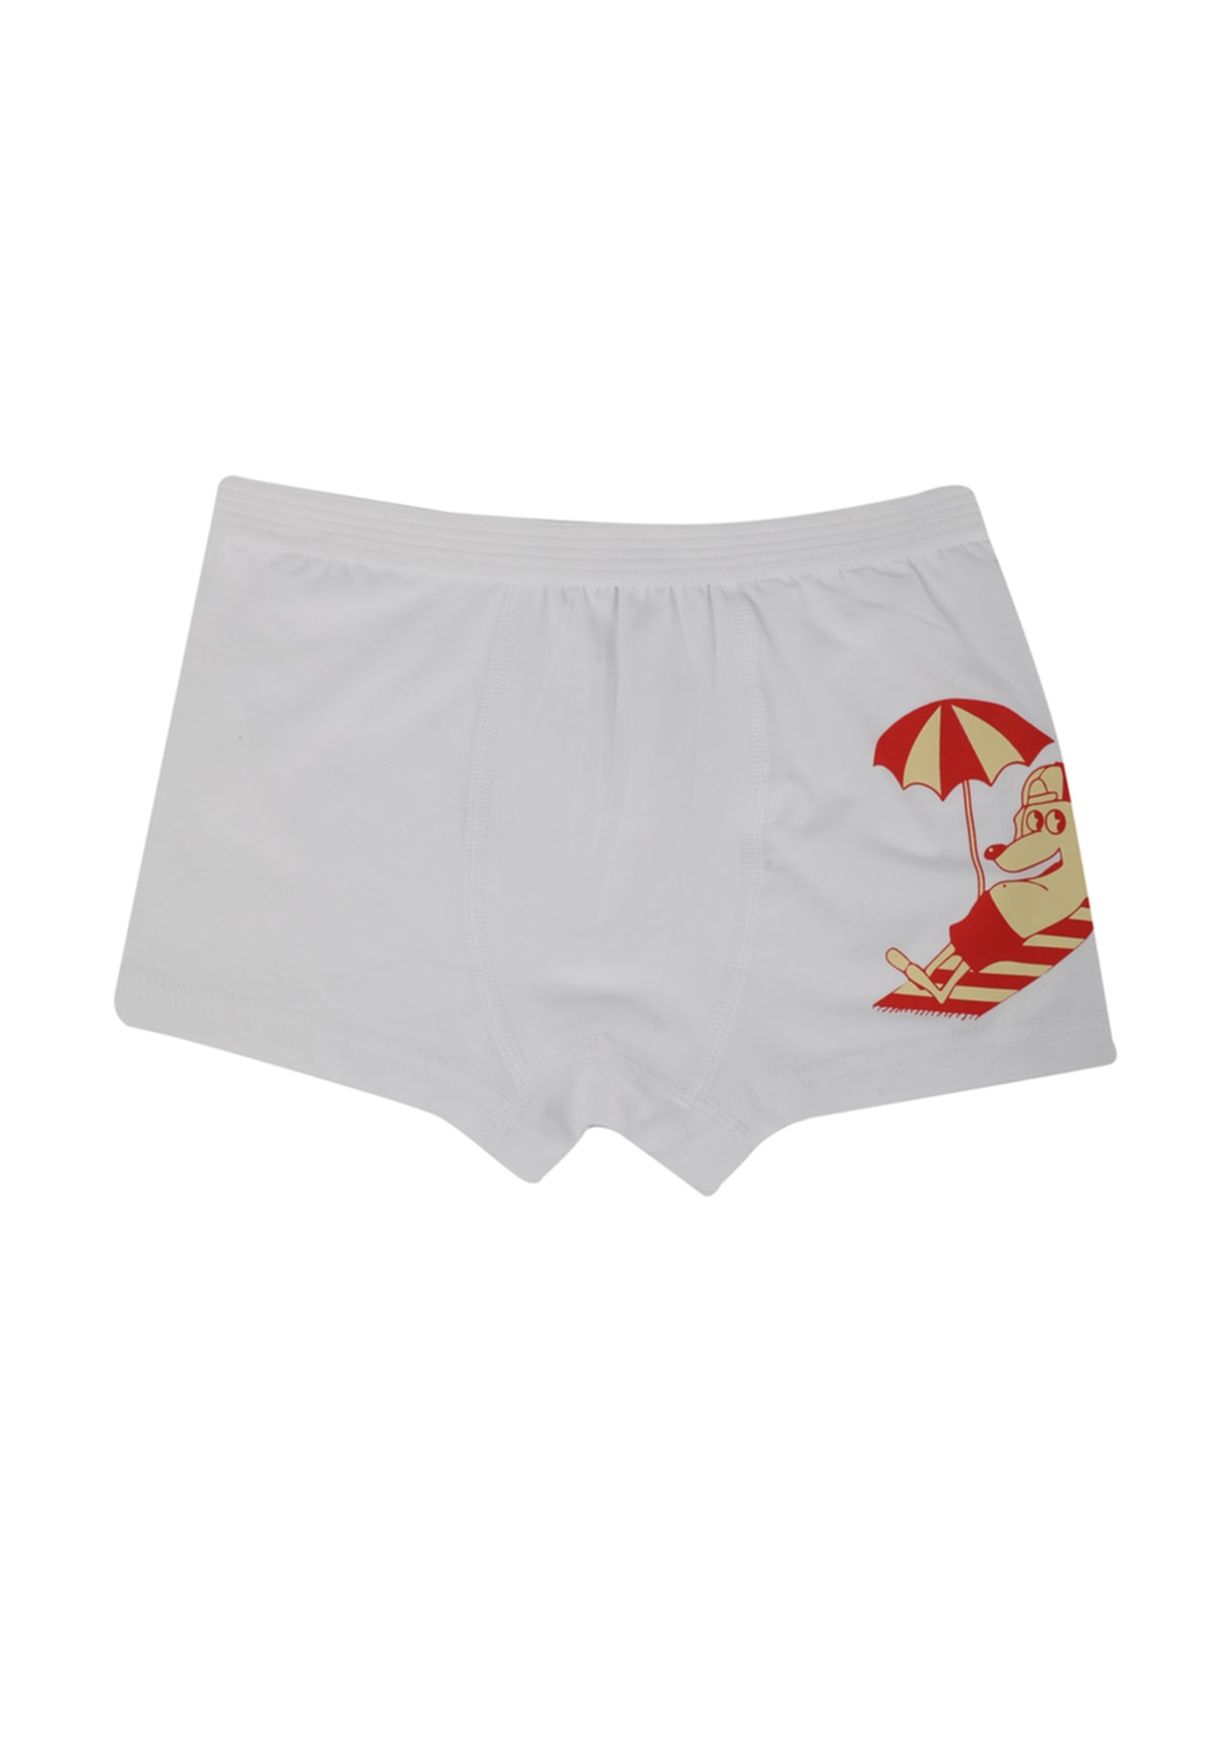 Kids 2 Pack Assorted Trunks